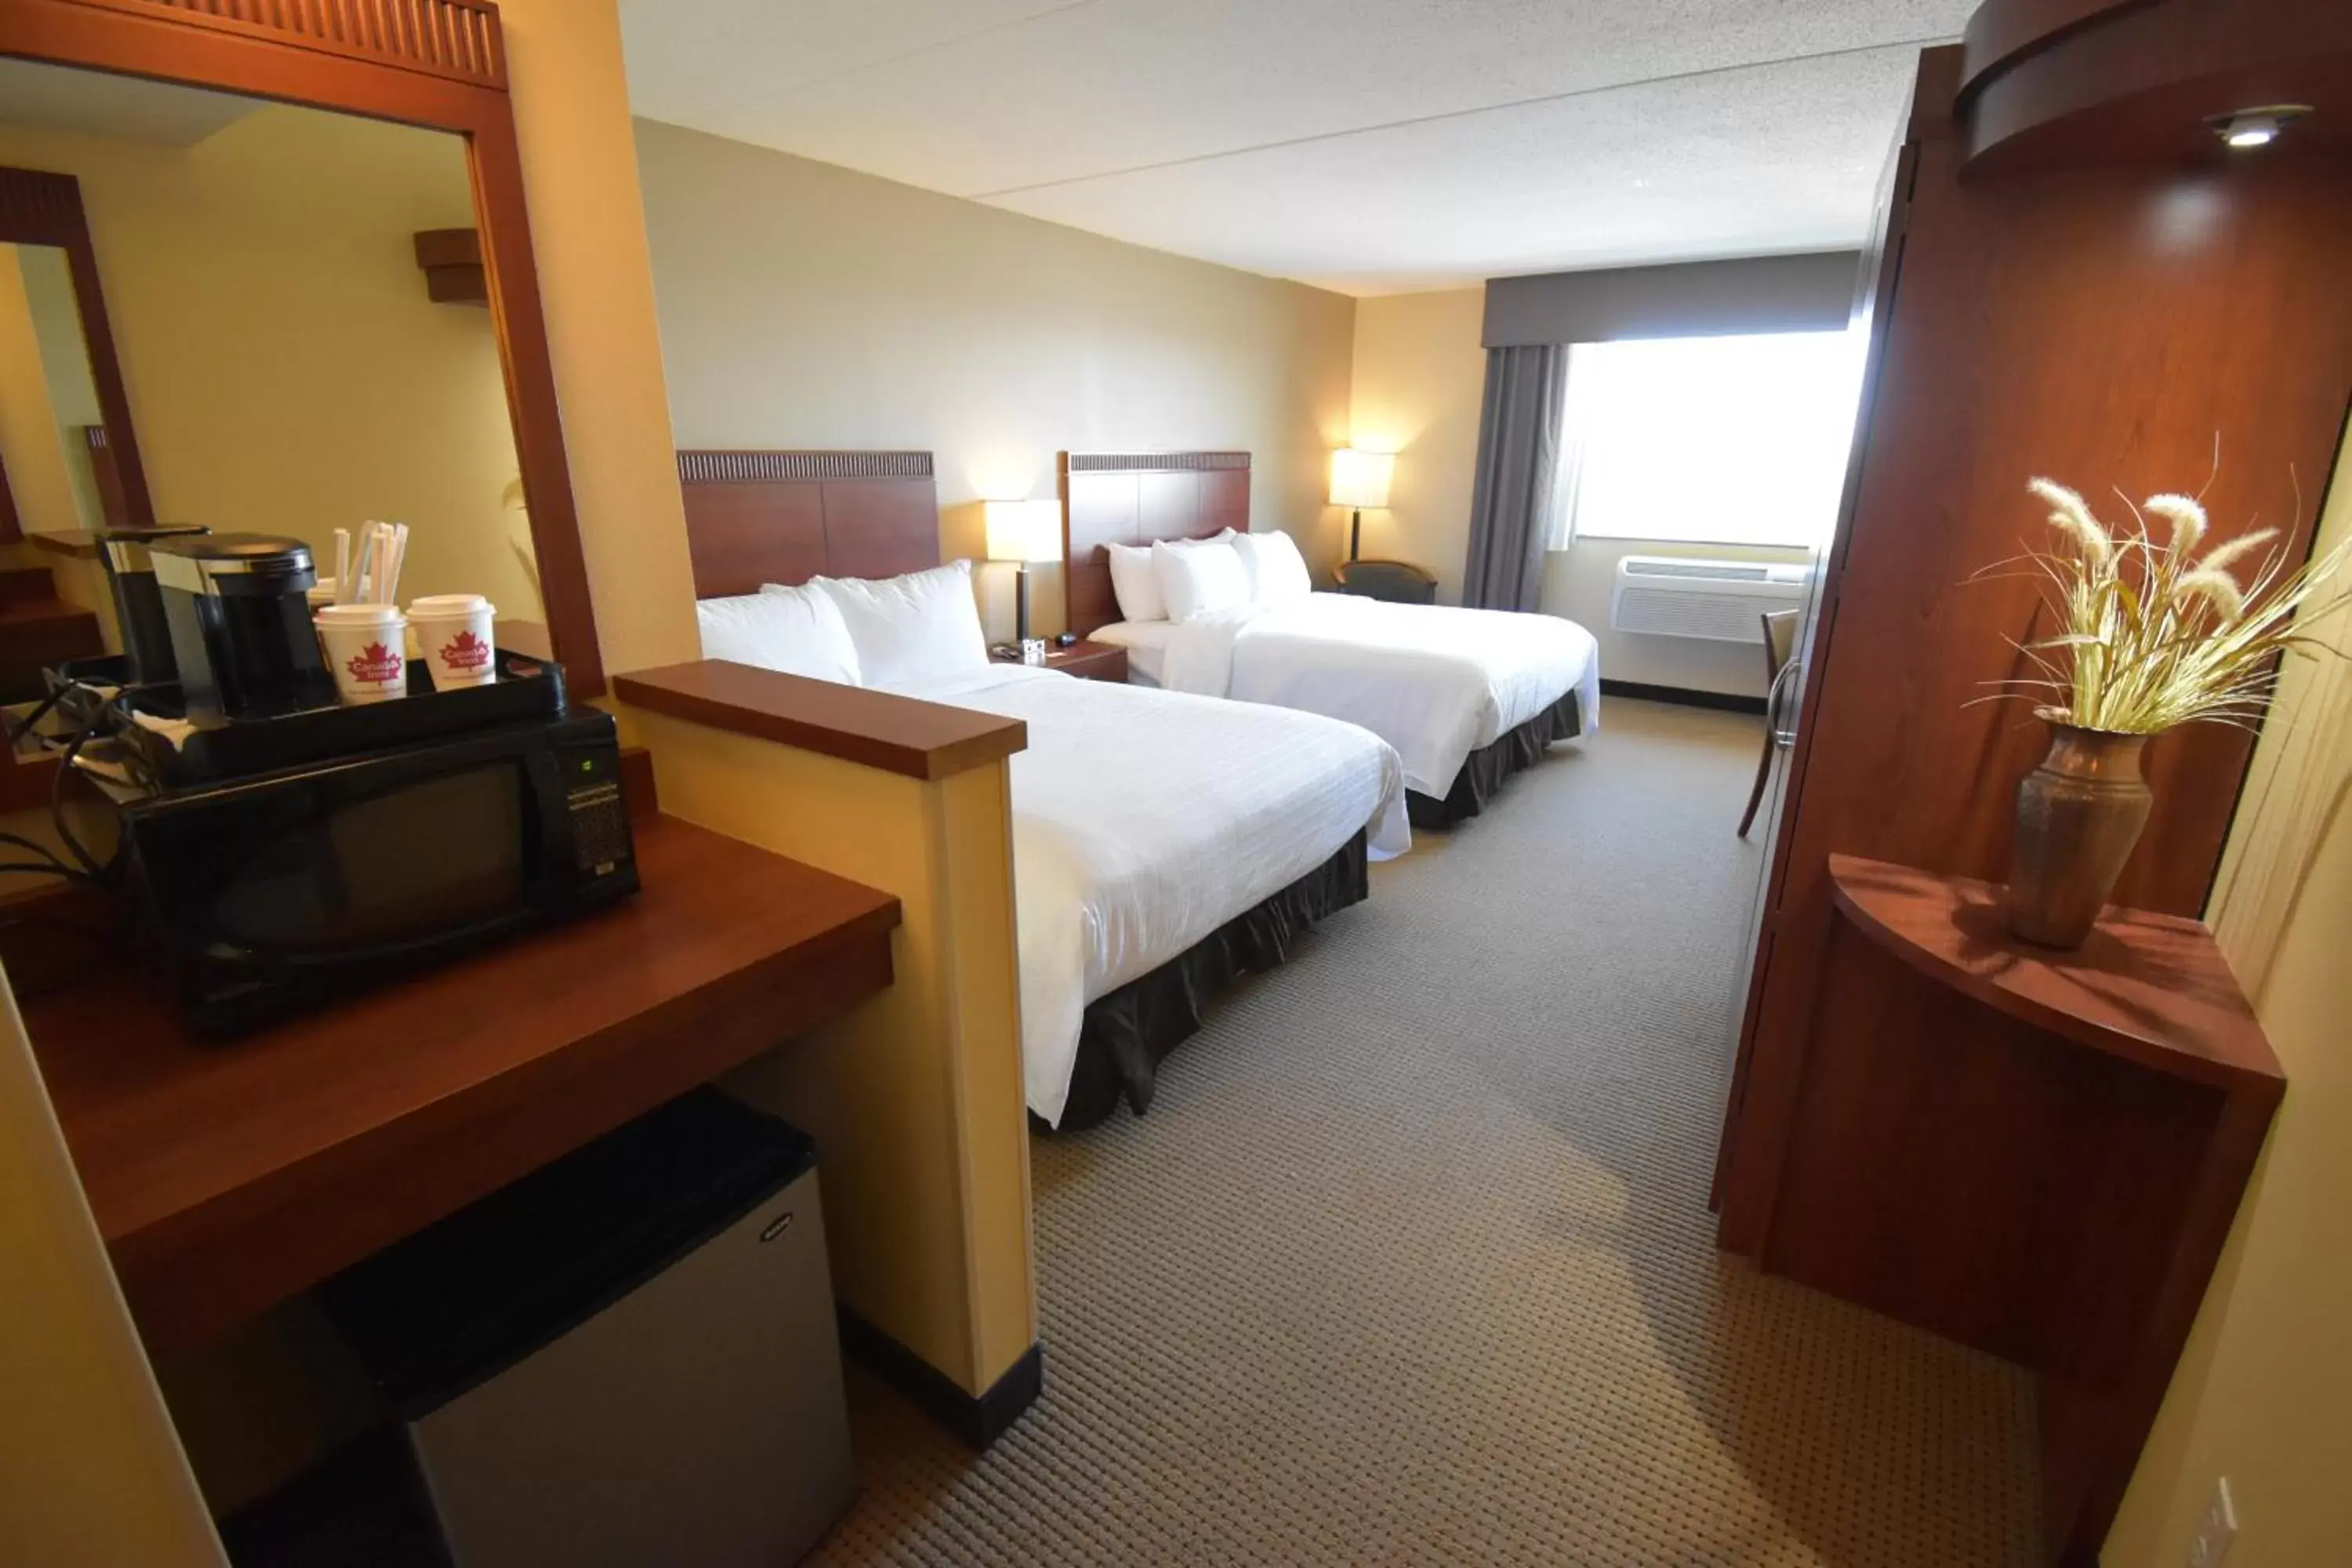 Queen Room with Two Queen Beds in Canad Inns Destination Center Grand Forks